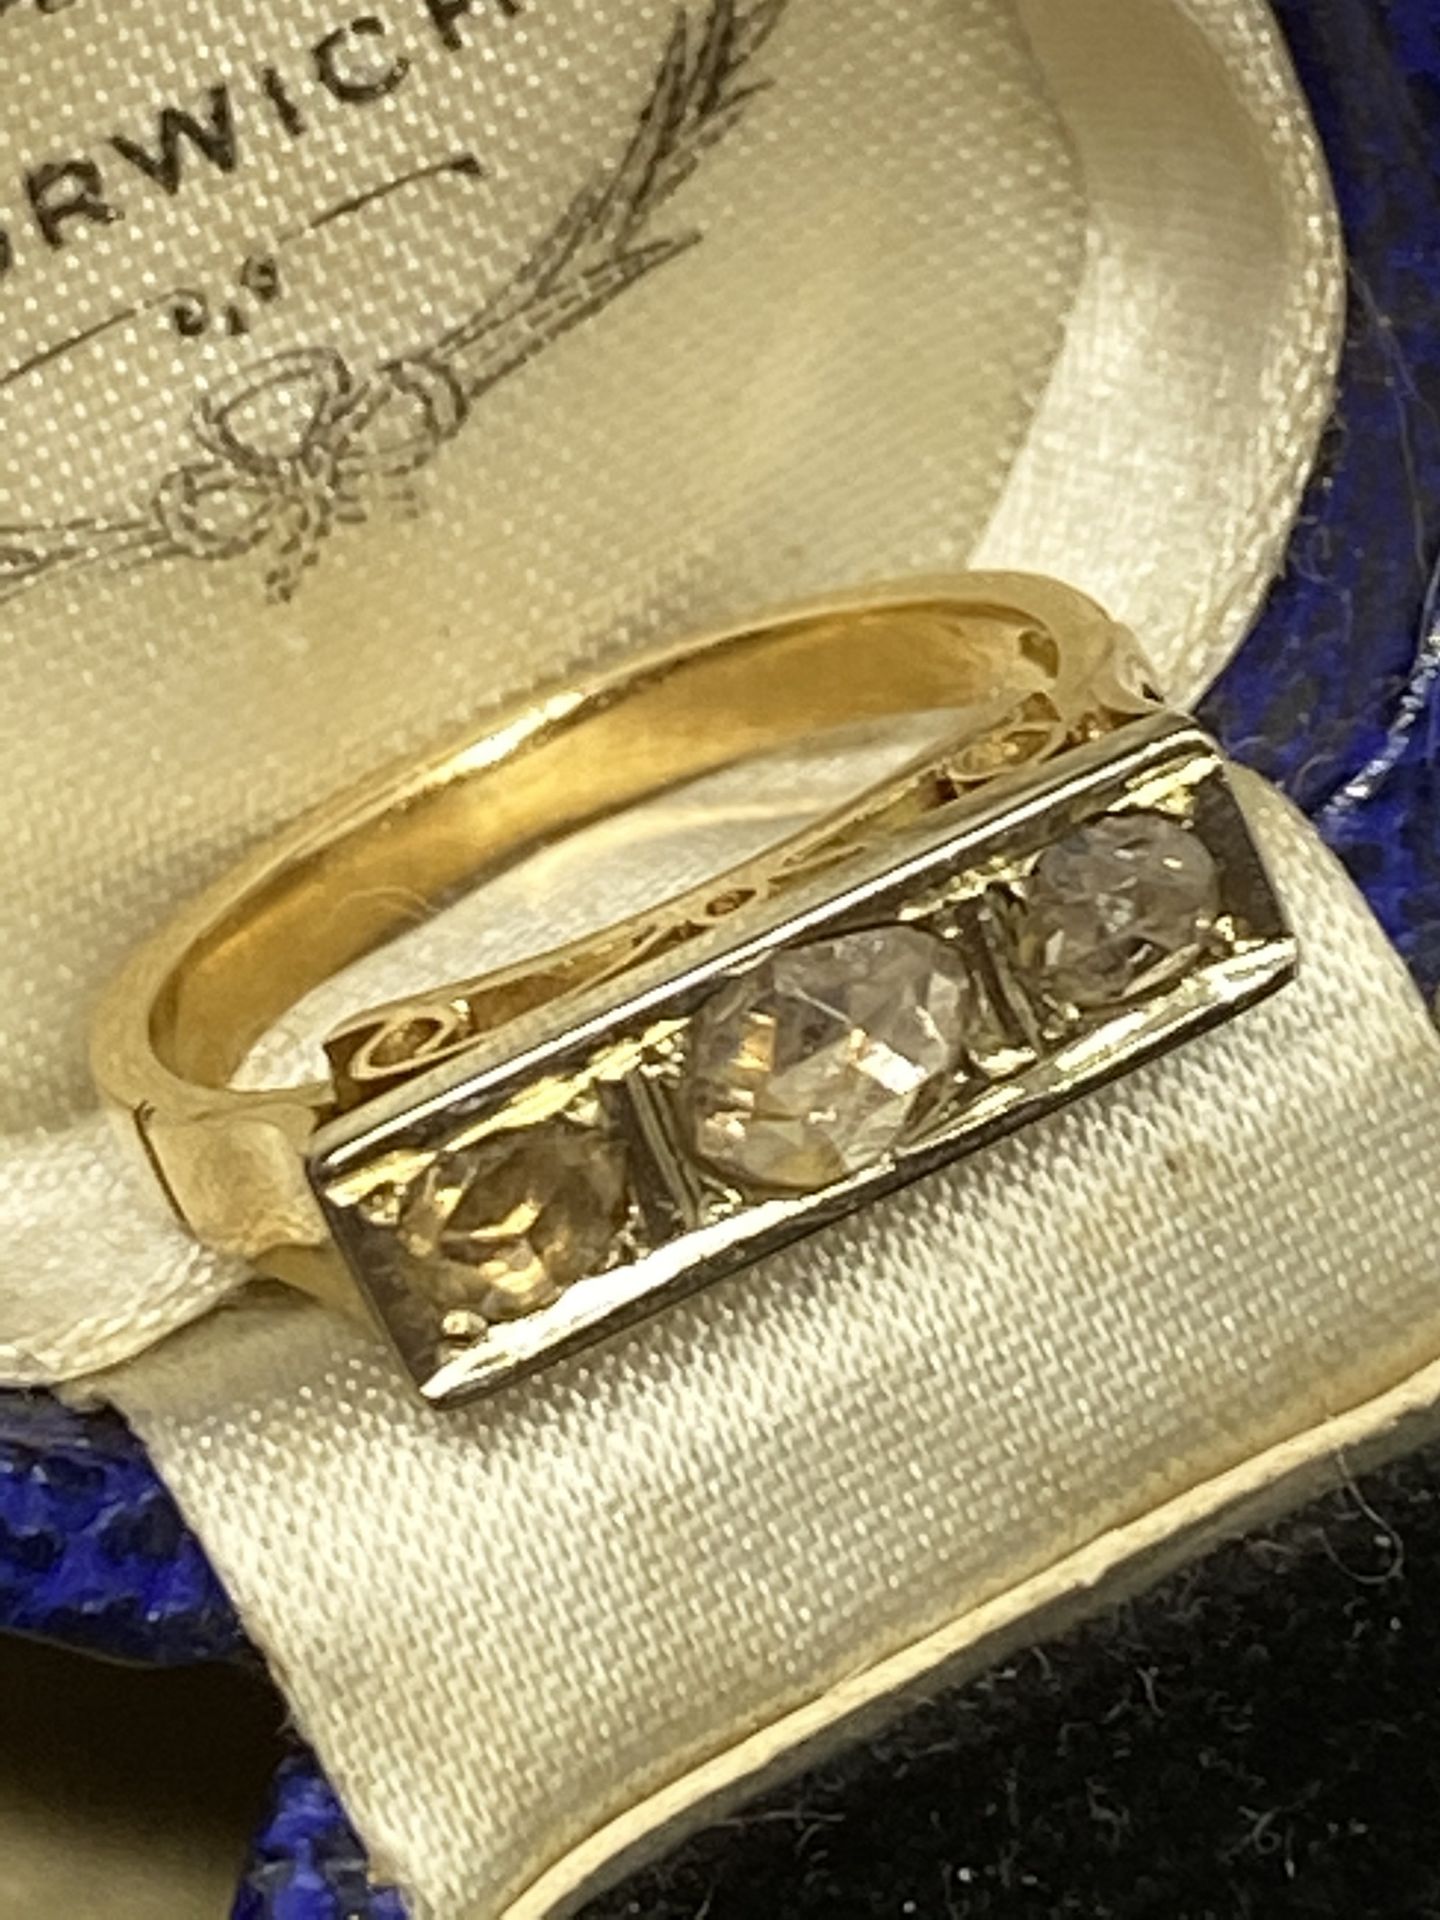 3 STONE ROSE DIAMOND SET RING IN YELLOW METAL TESTED AS 18ct GOLD - Image 4 of 6